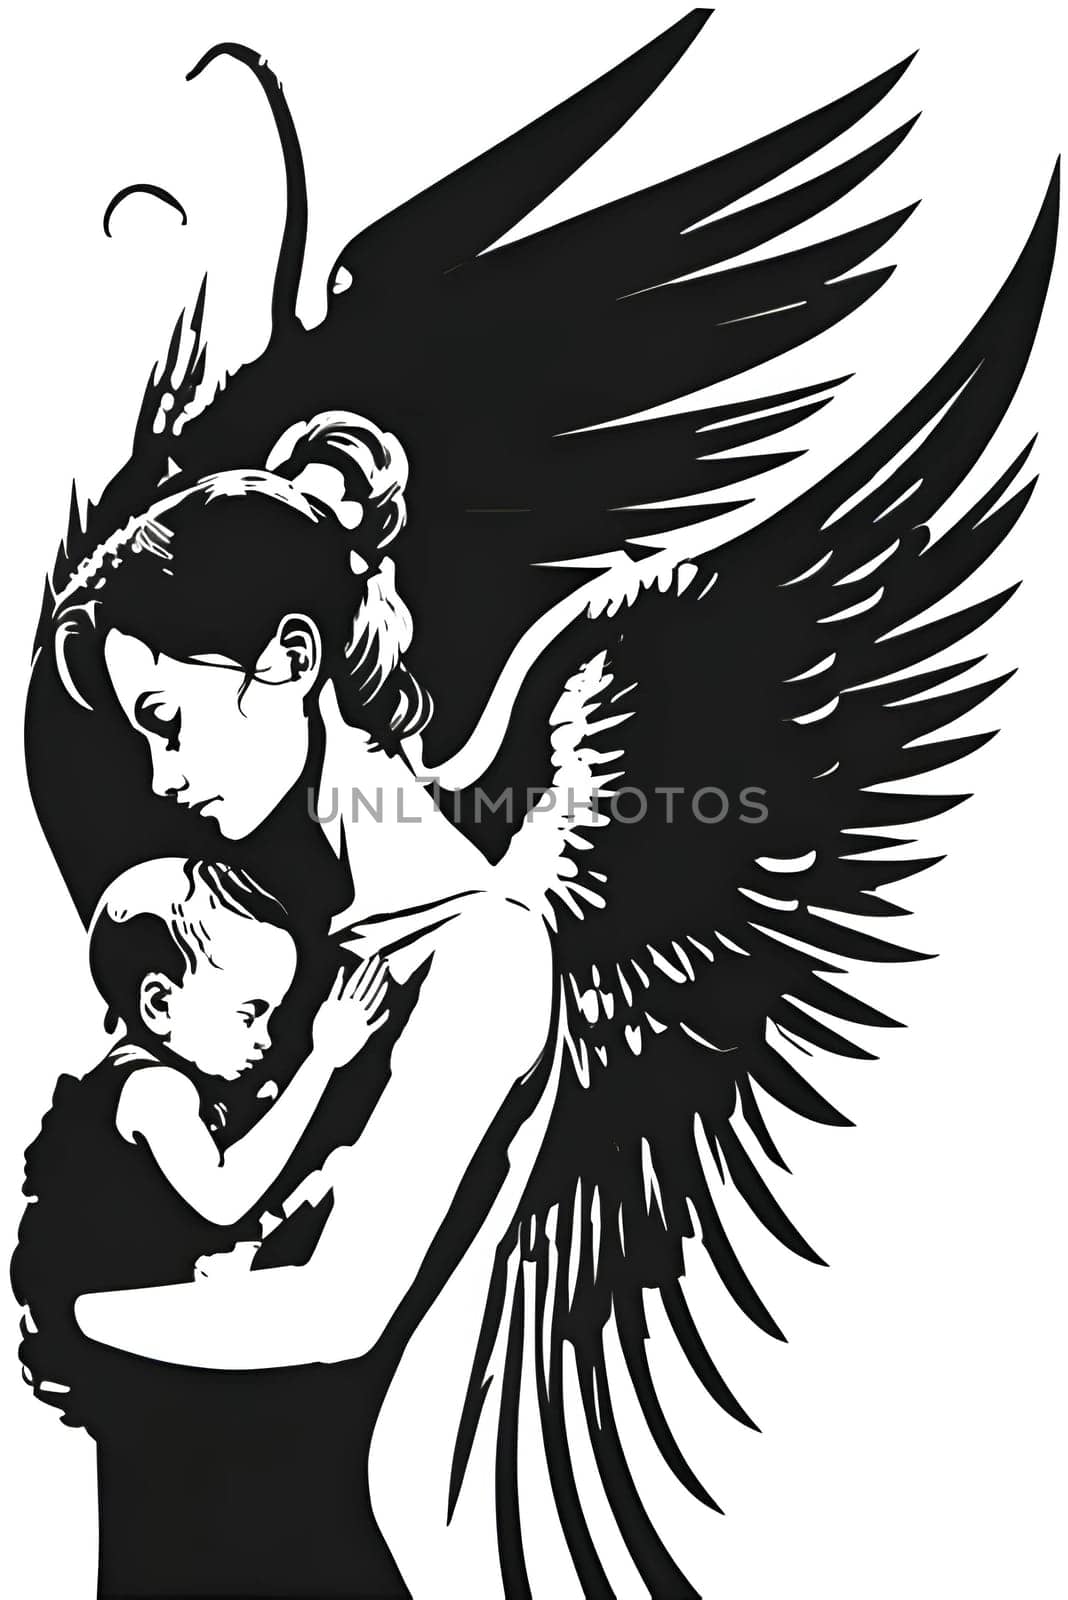 Black silhouette of a woman and baby on white background.